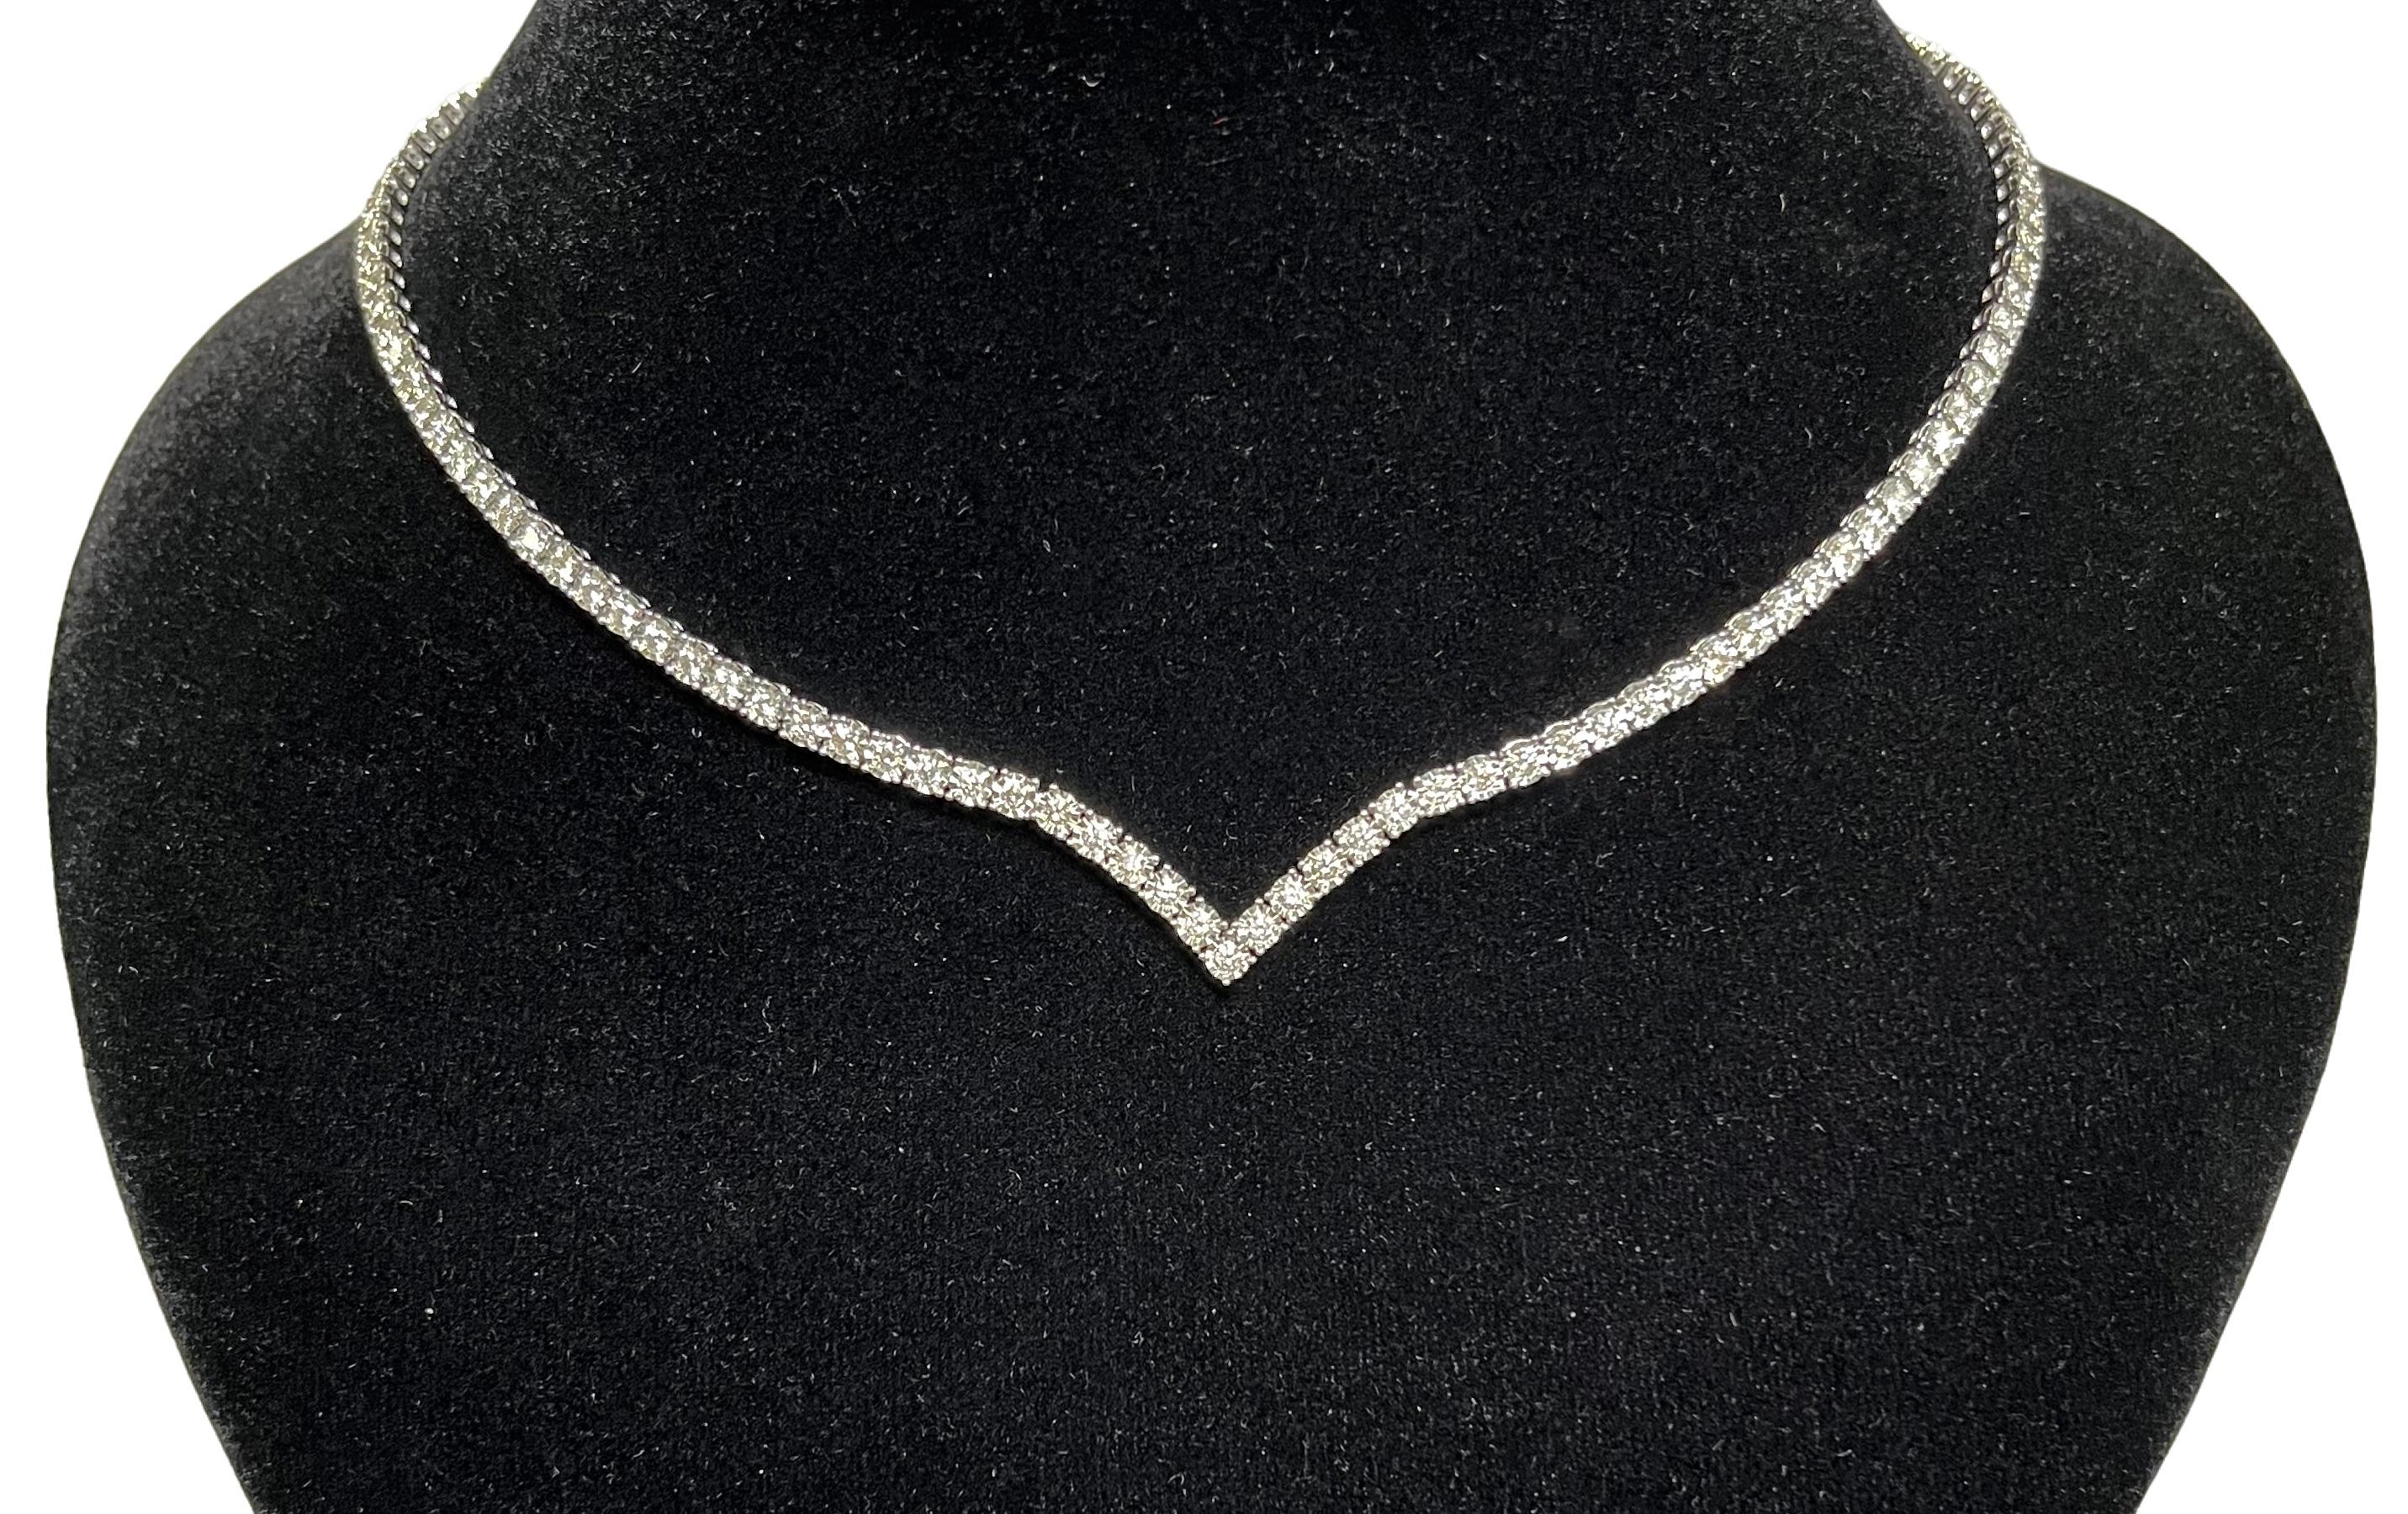 18K White Gold Necklace with Diamonds
18K White Gold - 26.95 GM
128 Diamonds - 5.08 CT

The Althoff Jewelry 18K white gold diamond necklace is a perfect example of how simplicity can be incredibly elegant. The necklace features high-quality diamonds